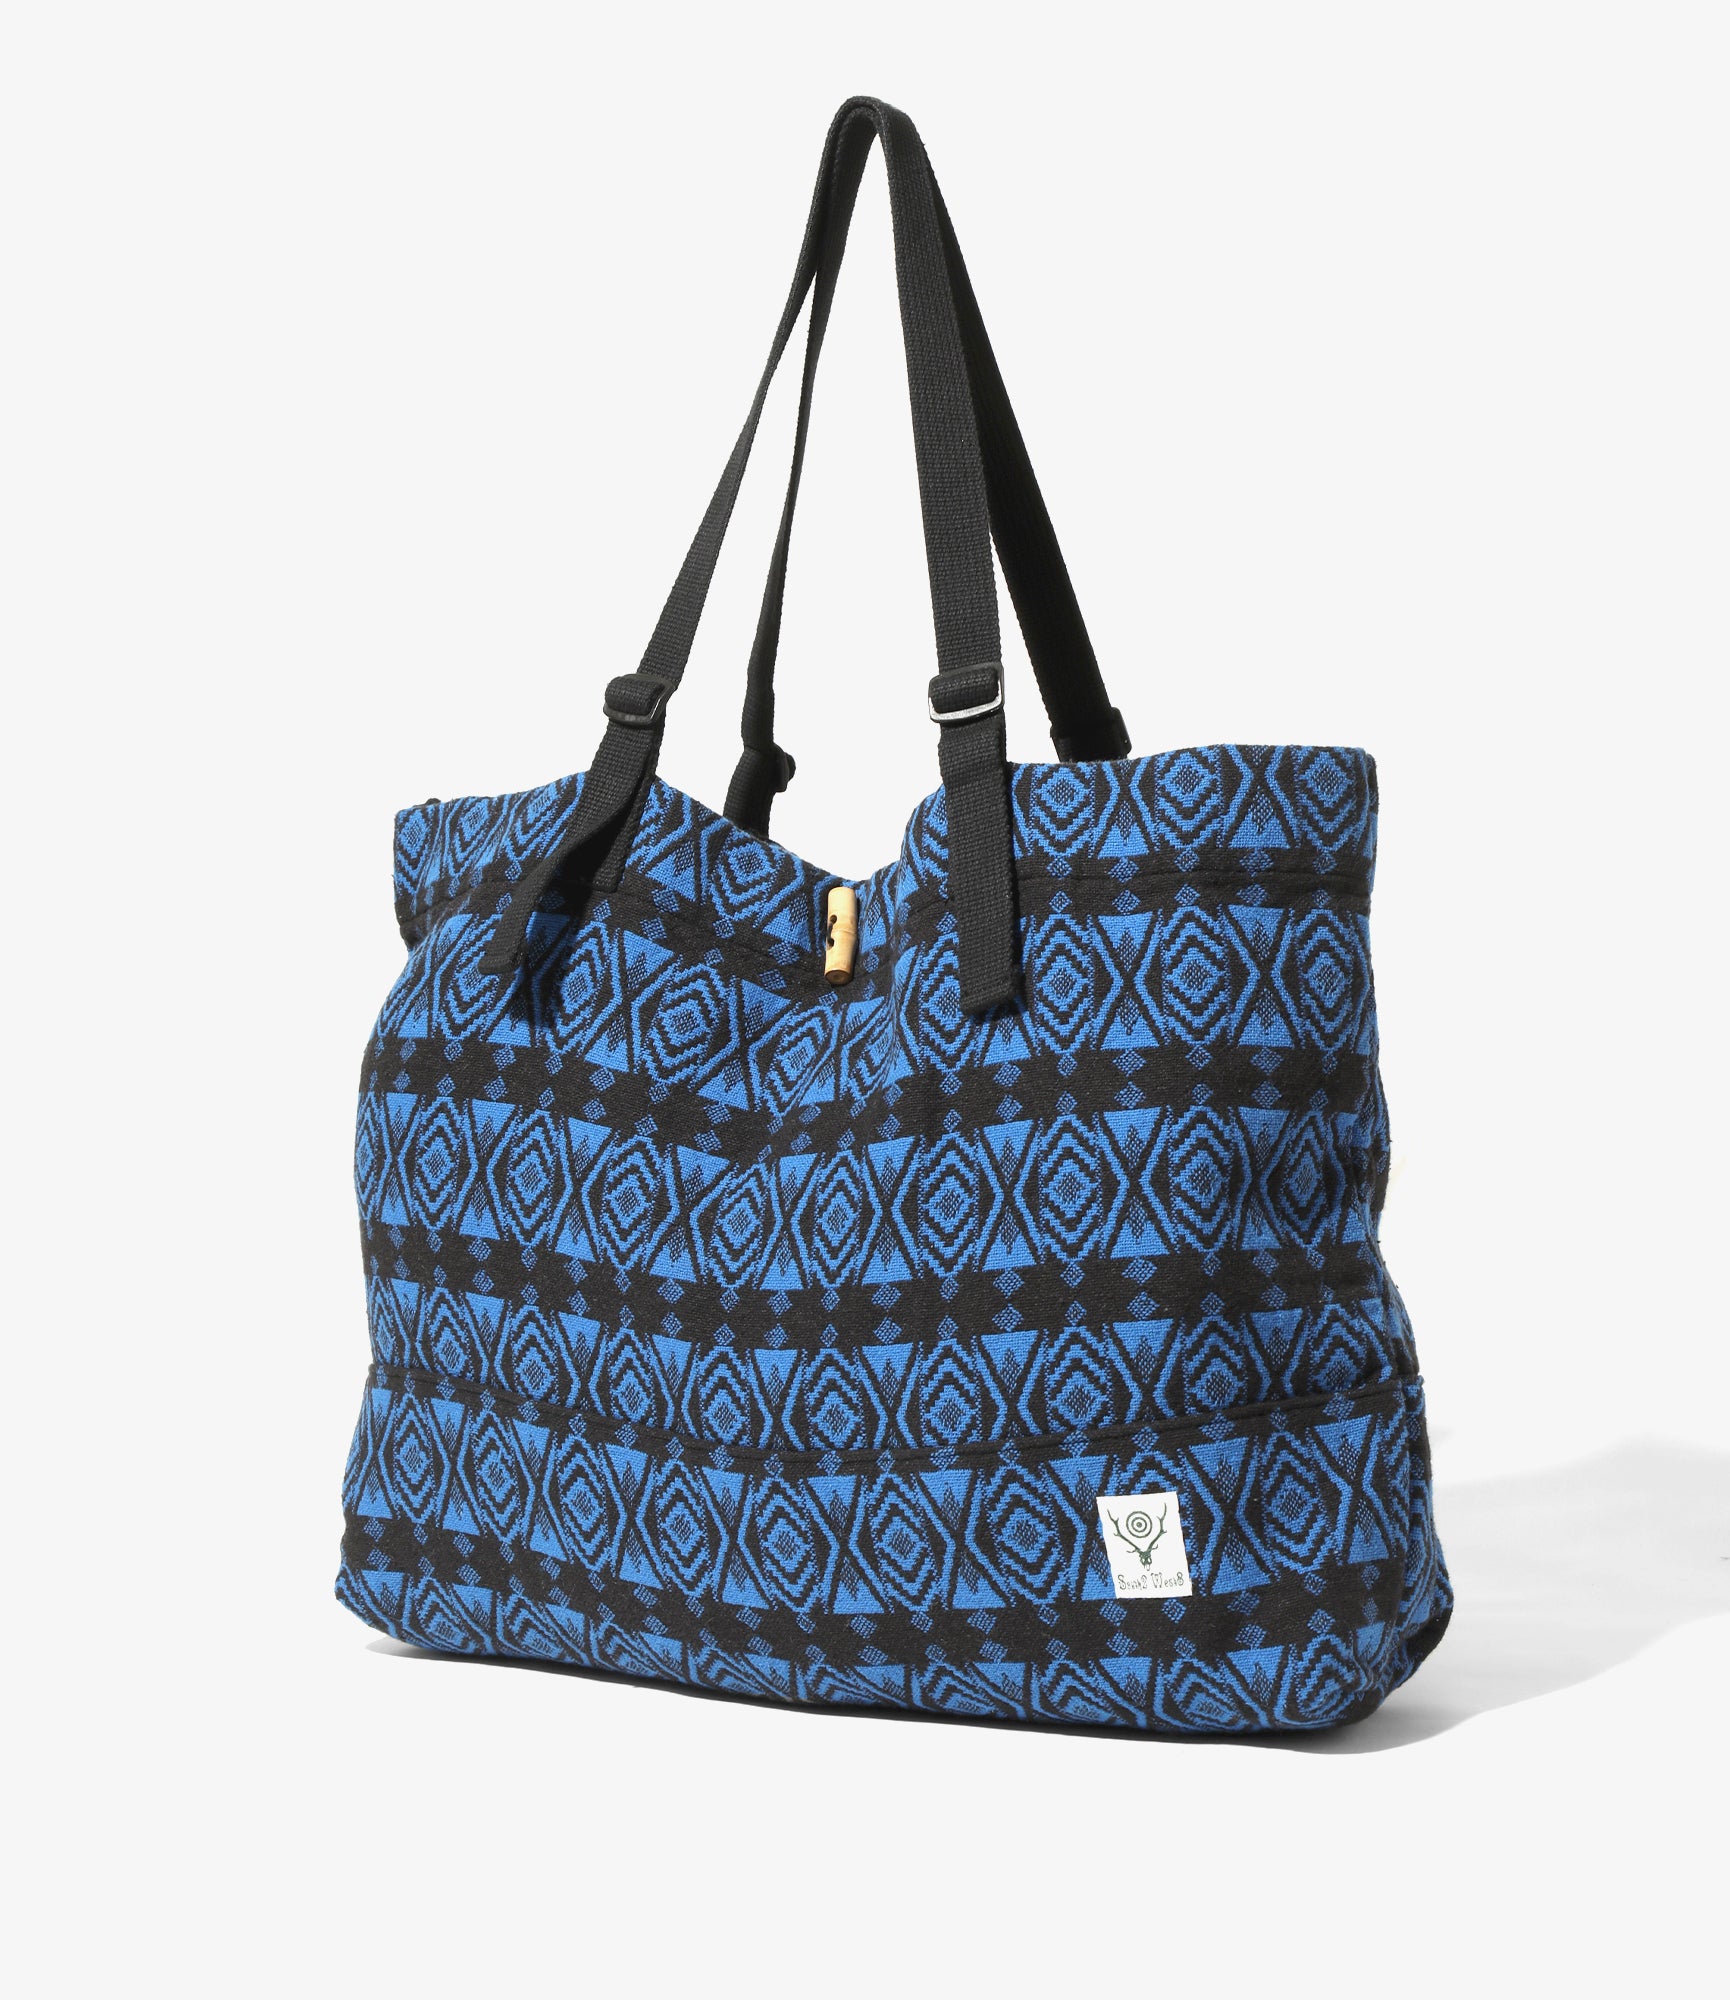 South2 West8 Canal Park Tote - Cotton Dobby / Native Pattern - Blue/Black